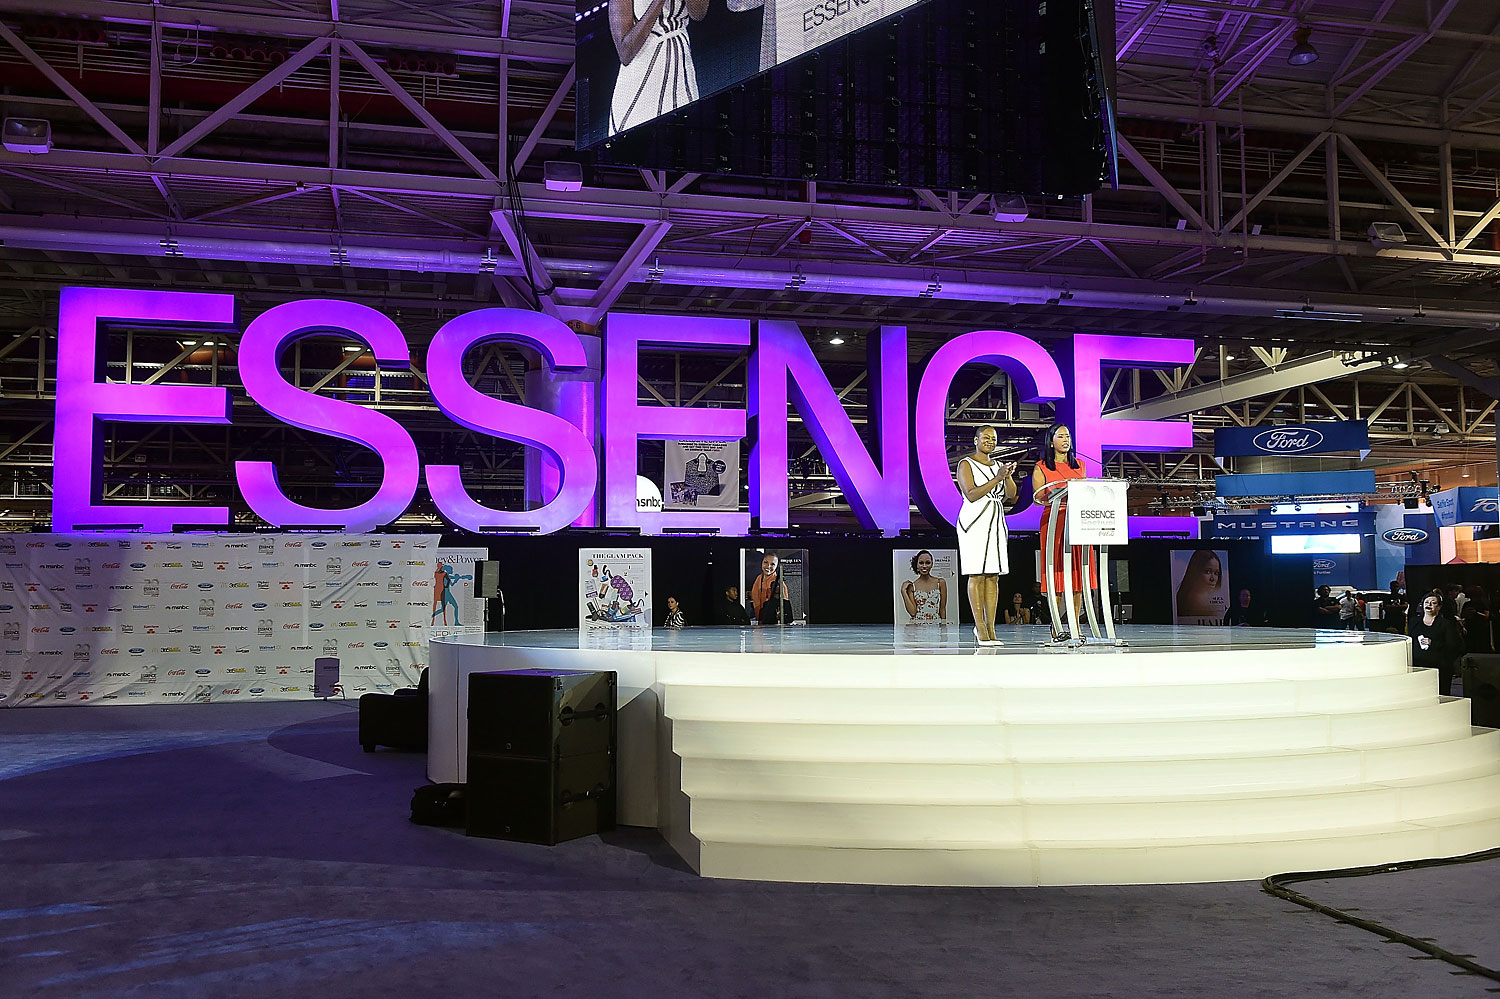 Vanessa K. Bush and Michelle Ebanks onstage at the 2014 Essence Music Festival on July 4, 2014 in New Orleans. (Paras Griffin—Getty Images)